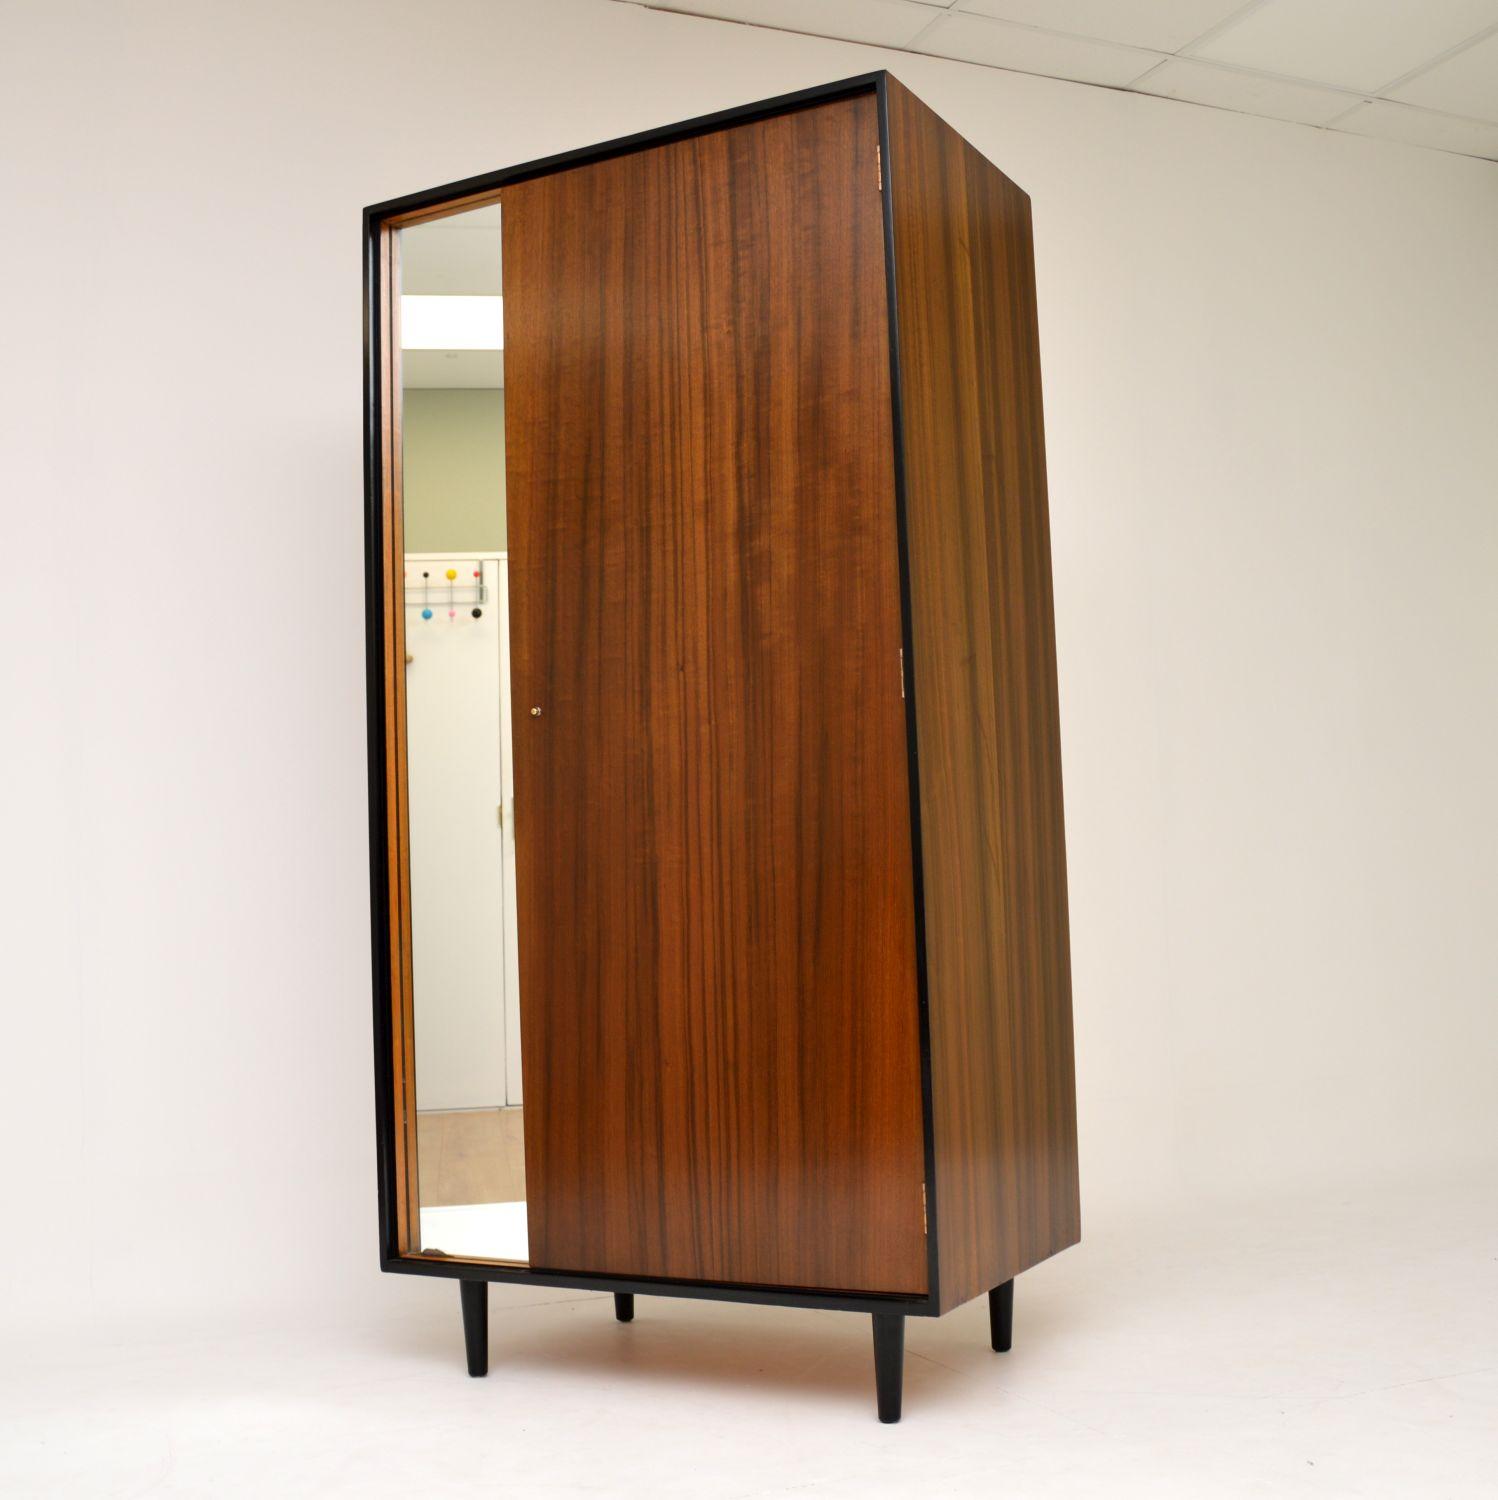 A beautifully designed and extremely well made vintage wardrobe in walnut, this dates from the 1950s. It was designed by John & Sylvia Reid for Stag’s C Range of furniture. We have had this stripped and re-polished to a very high standard, the